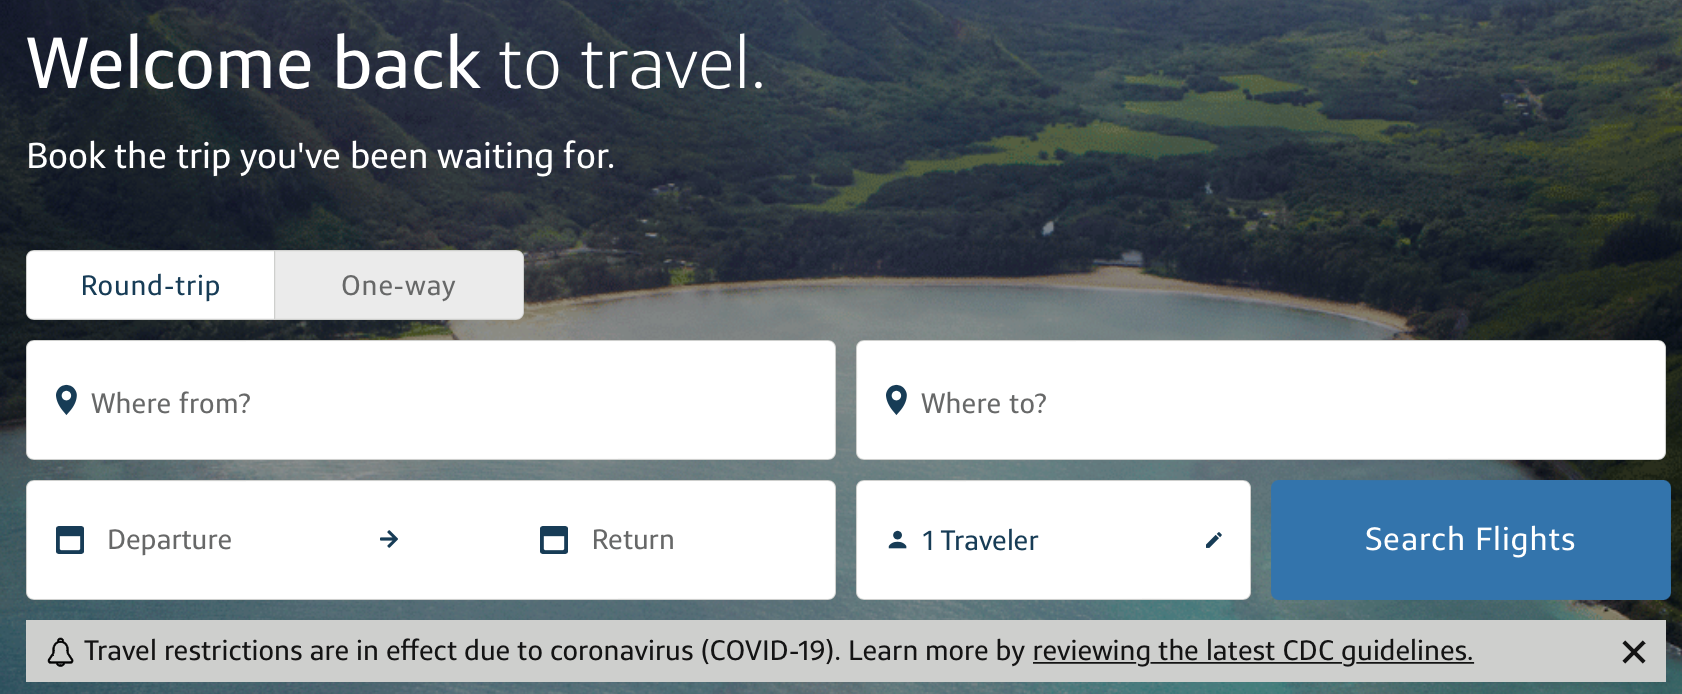 booking travel through capital one